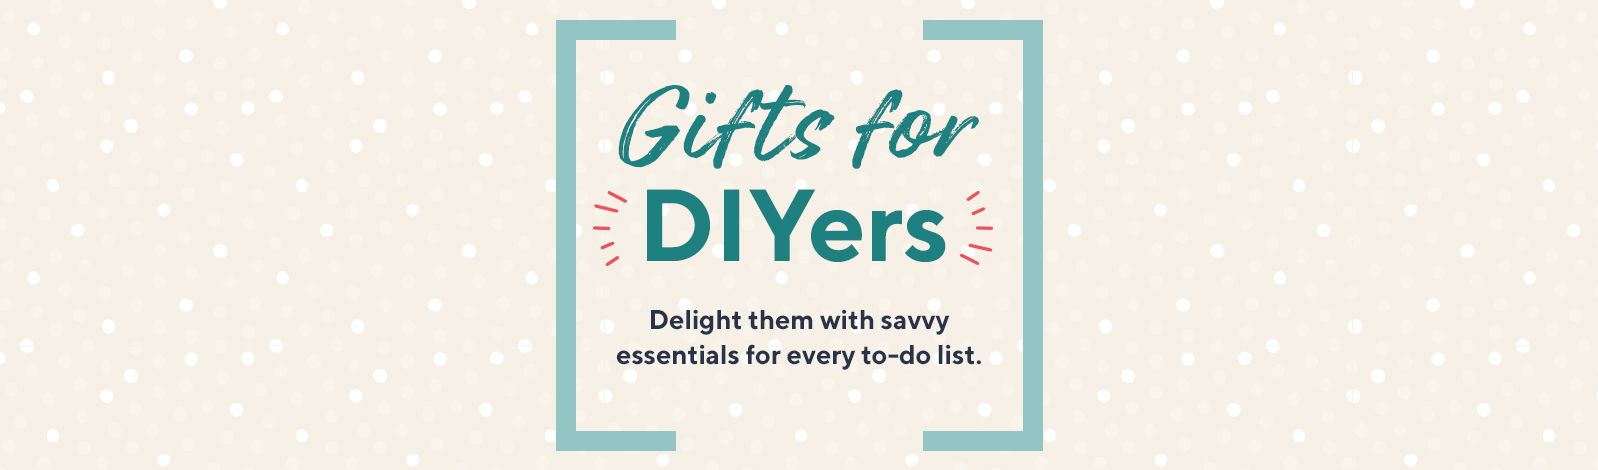 Gifts for DIYers.  Delight them with savvy essentials for every to-do list.